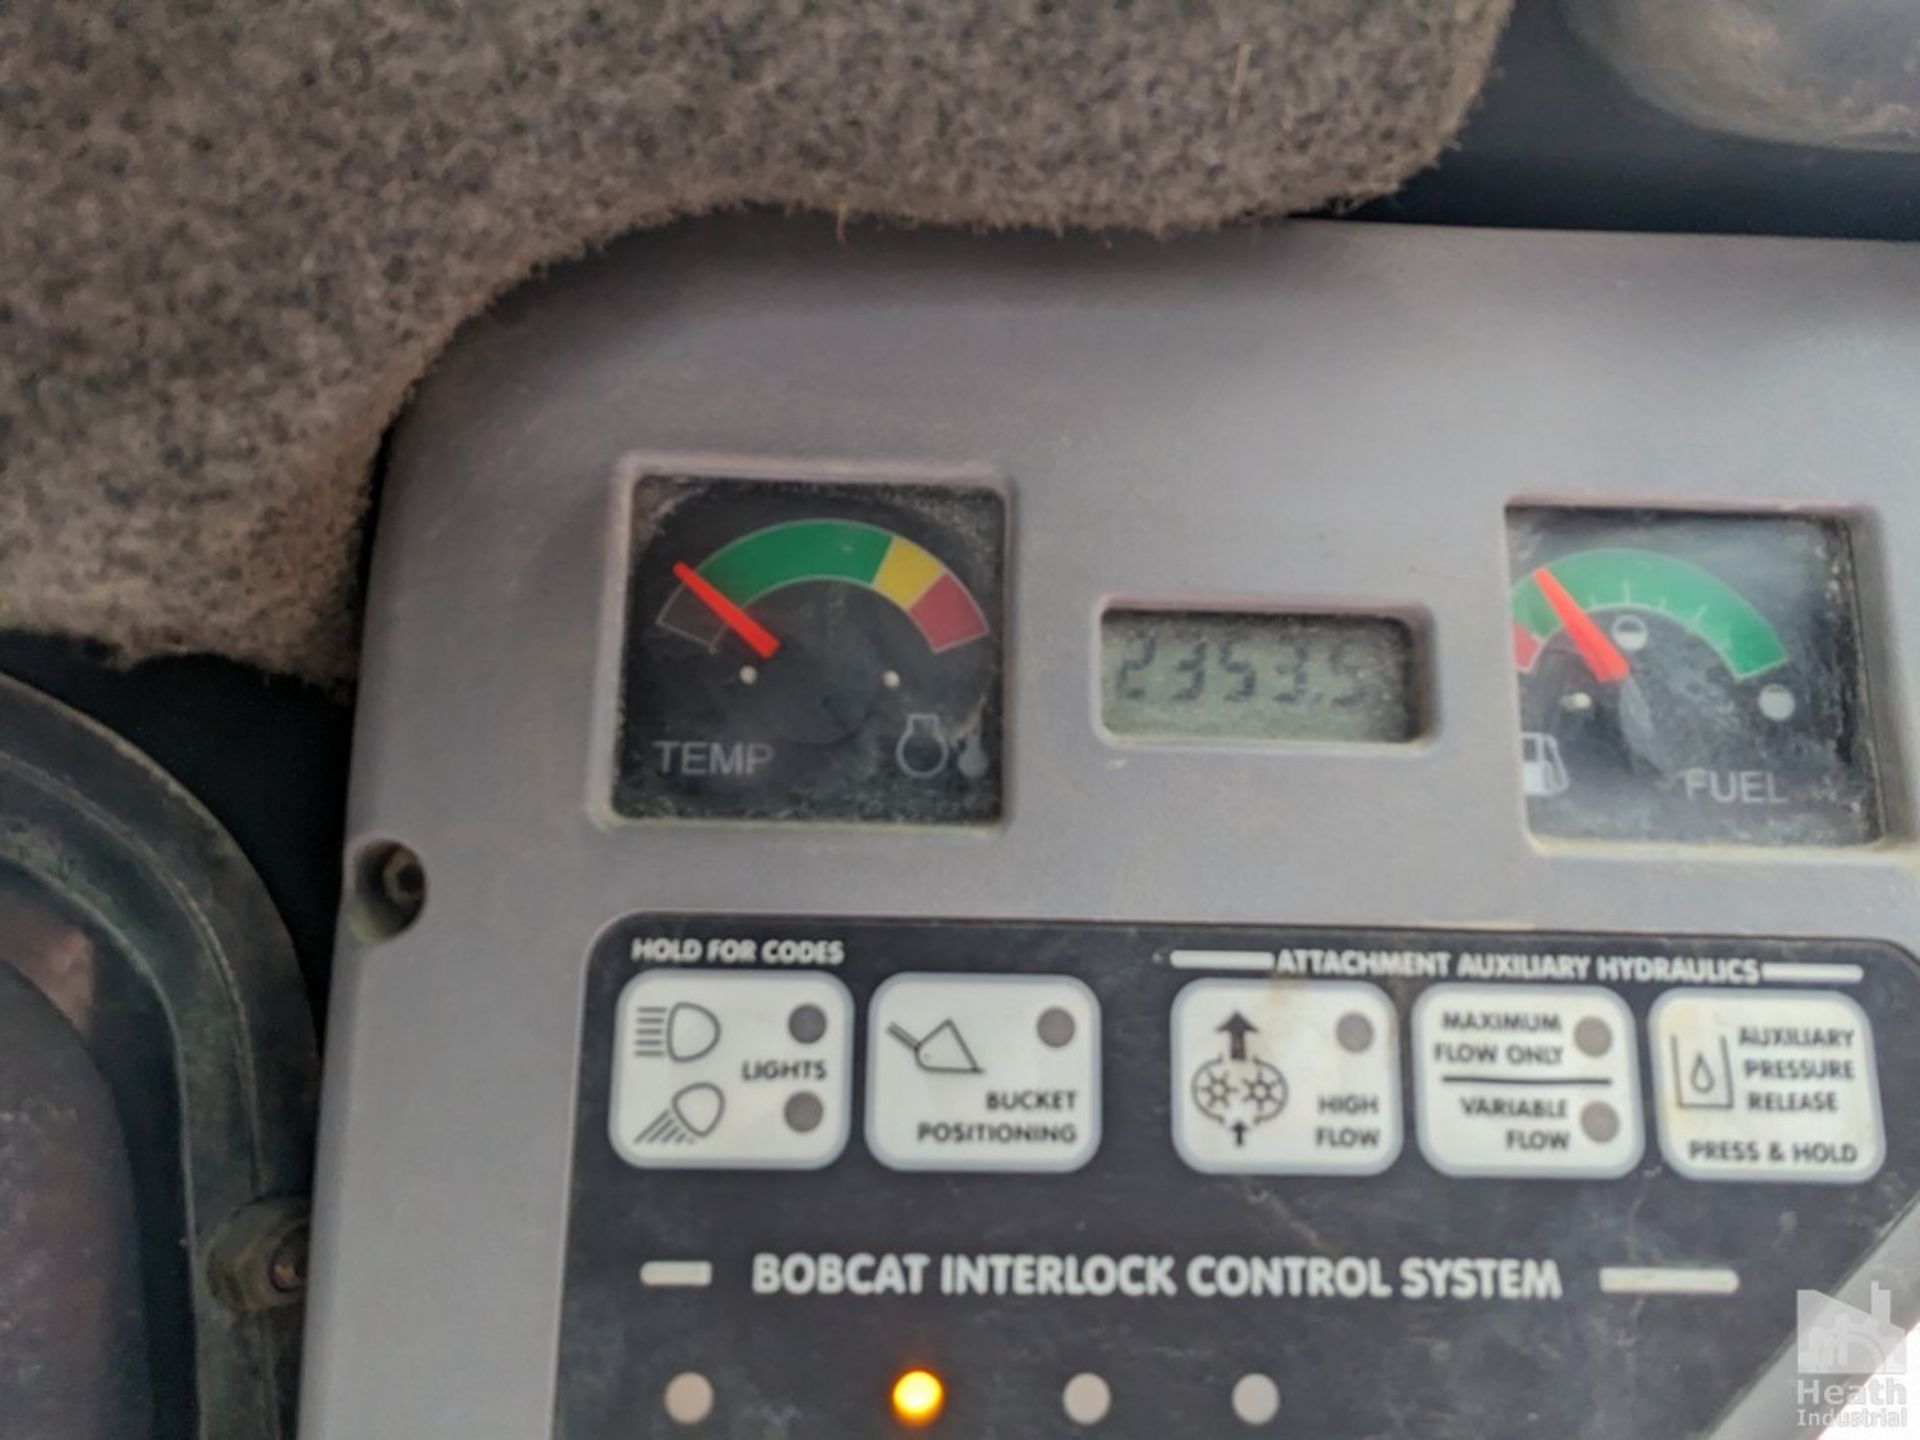 BOBCAT MODEL S250 SKID STEER LOADER, PIN 521316469, AUX HYDRAULICS, 2353 HOURS SHOWN ON METER - Image 9 of 10